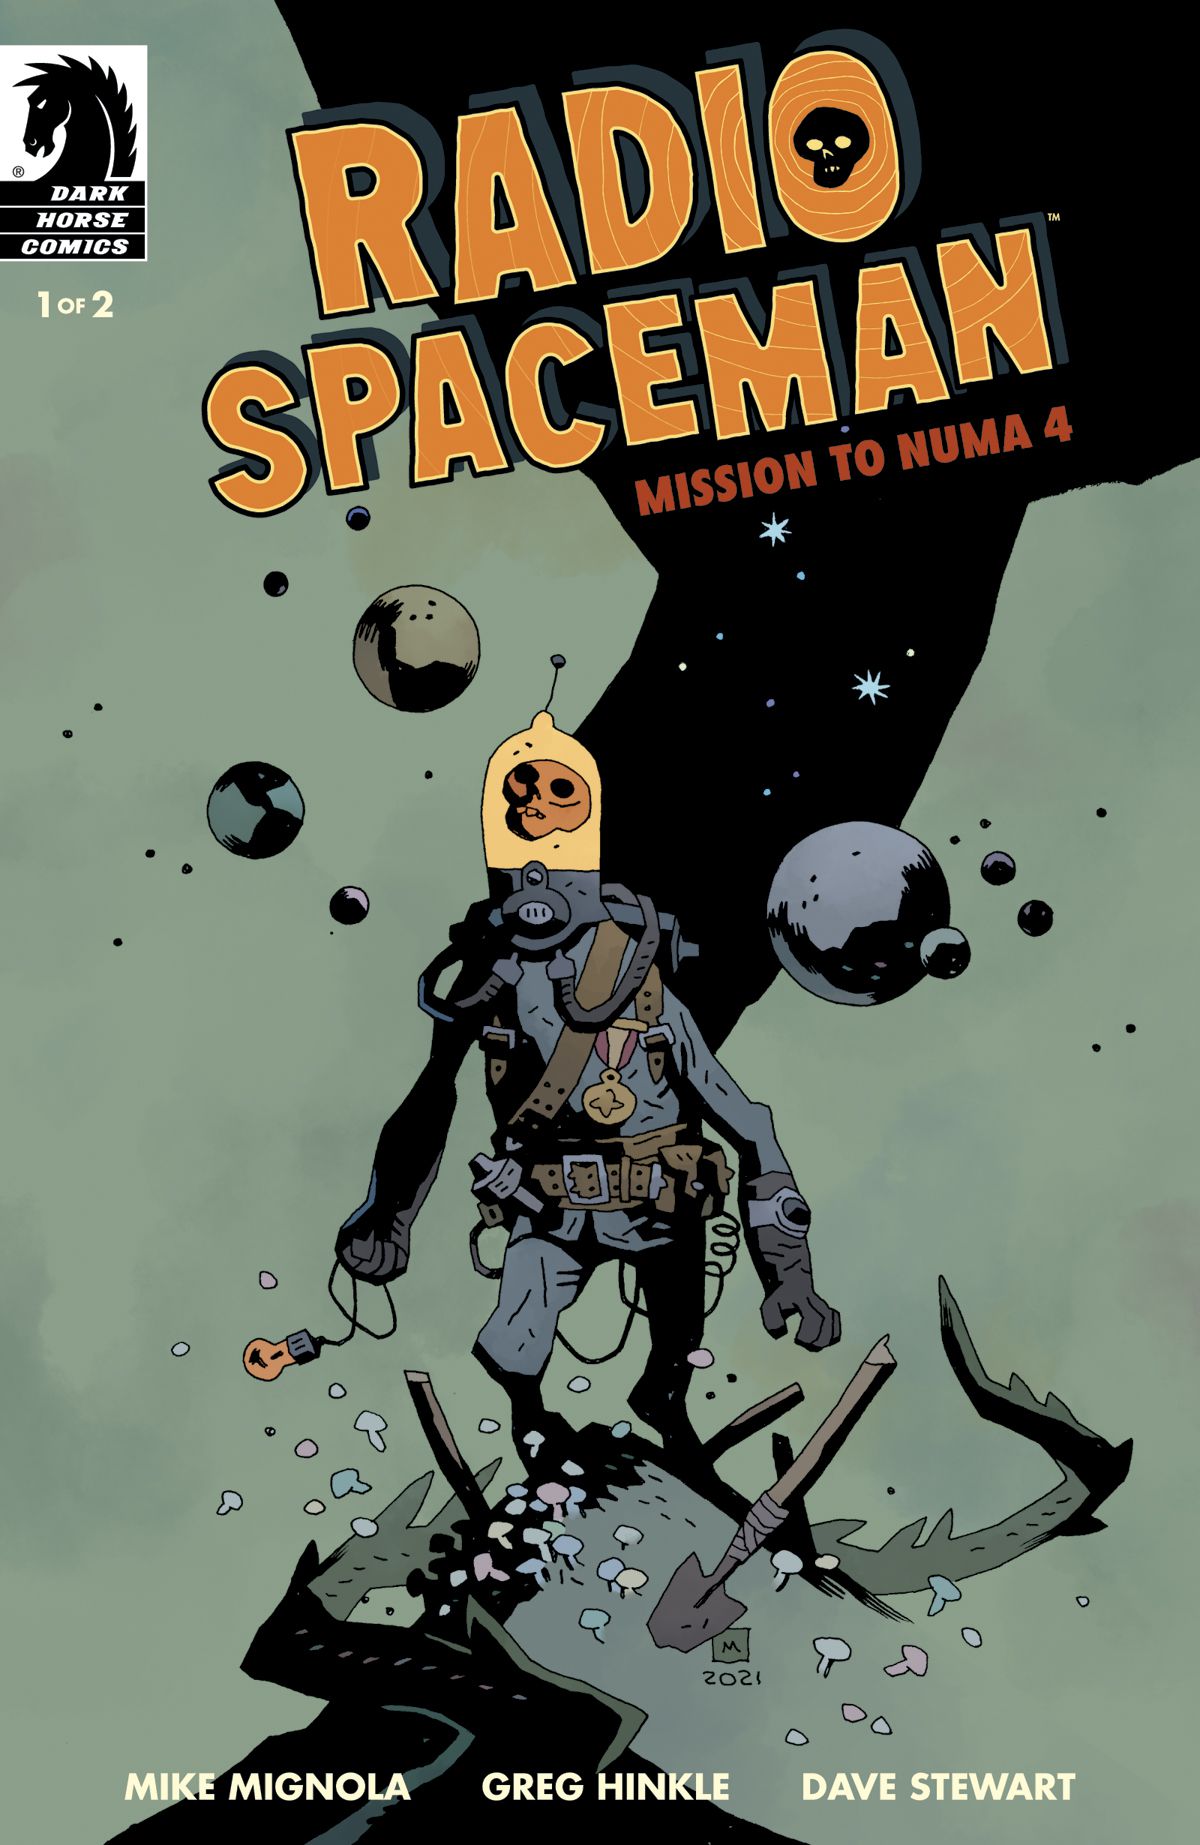 Radio Spaceman, a sort of robot-like exporer laden with belts, tools, and a medal, whose head is a free-floating skull inside a lamp-shaped space helmet, stands on top of a hill as if in awe of the universe on the cover of Radio Spaceman: Mission to Numa 4 #1 (2022).